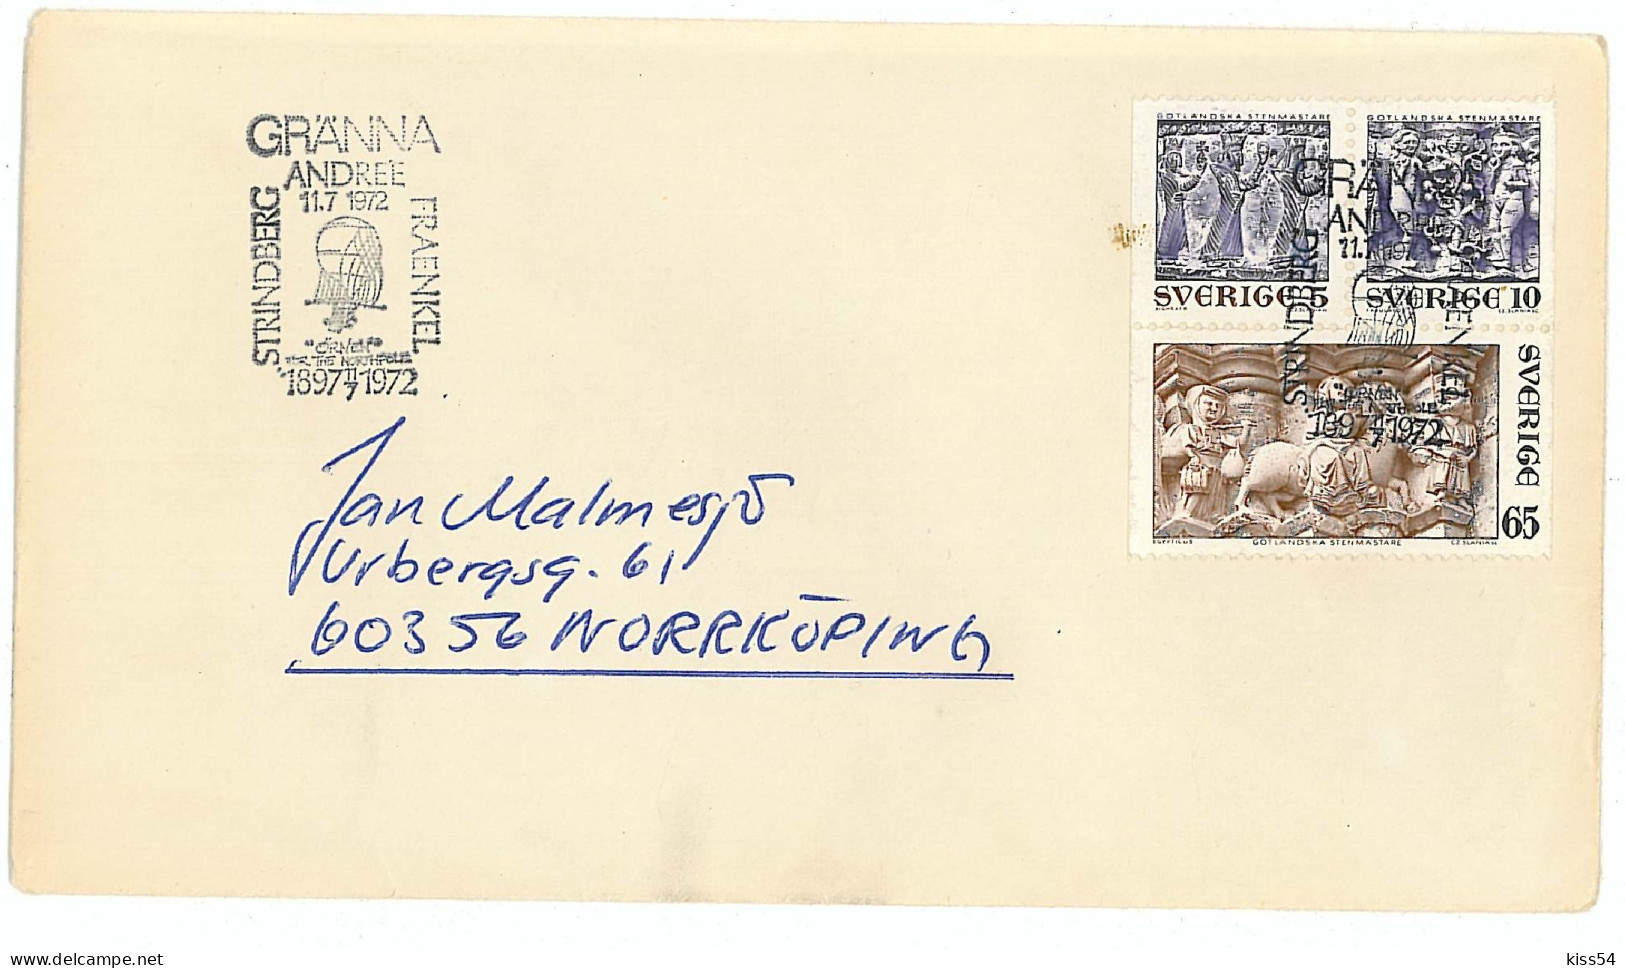 COV 84 - 37 BALOON, Sweden - Cover - 1972 - Other (Air)